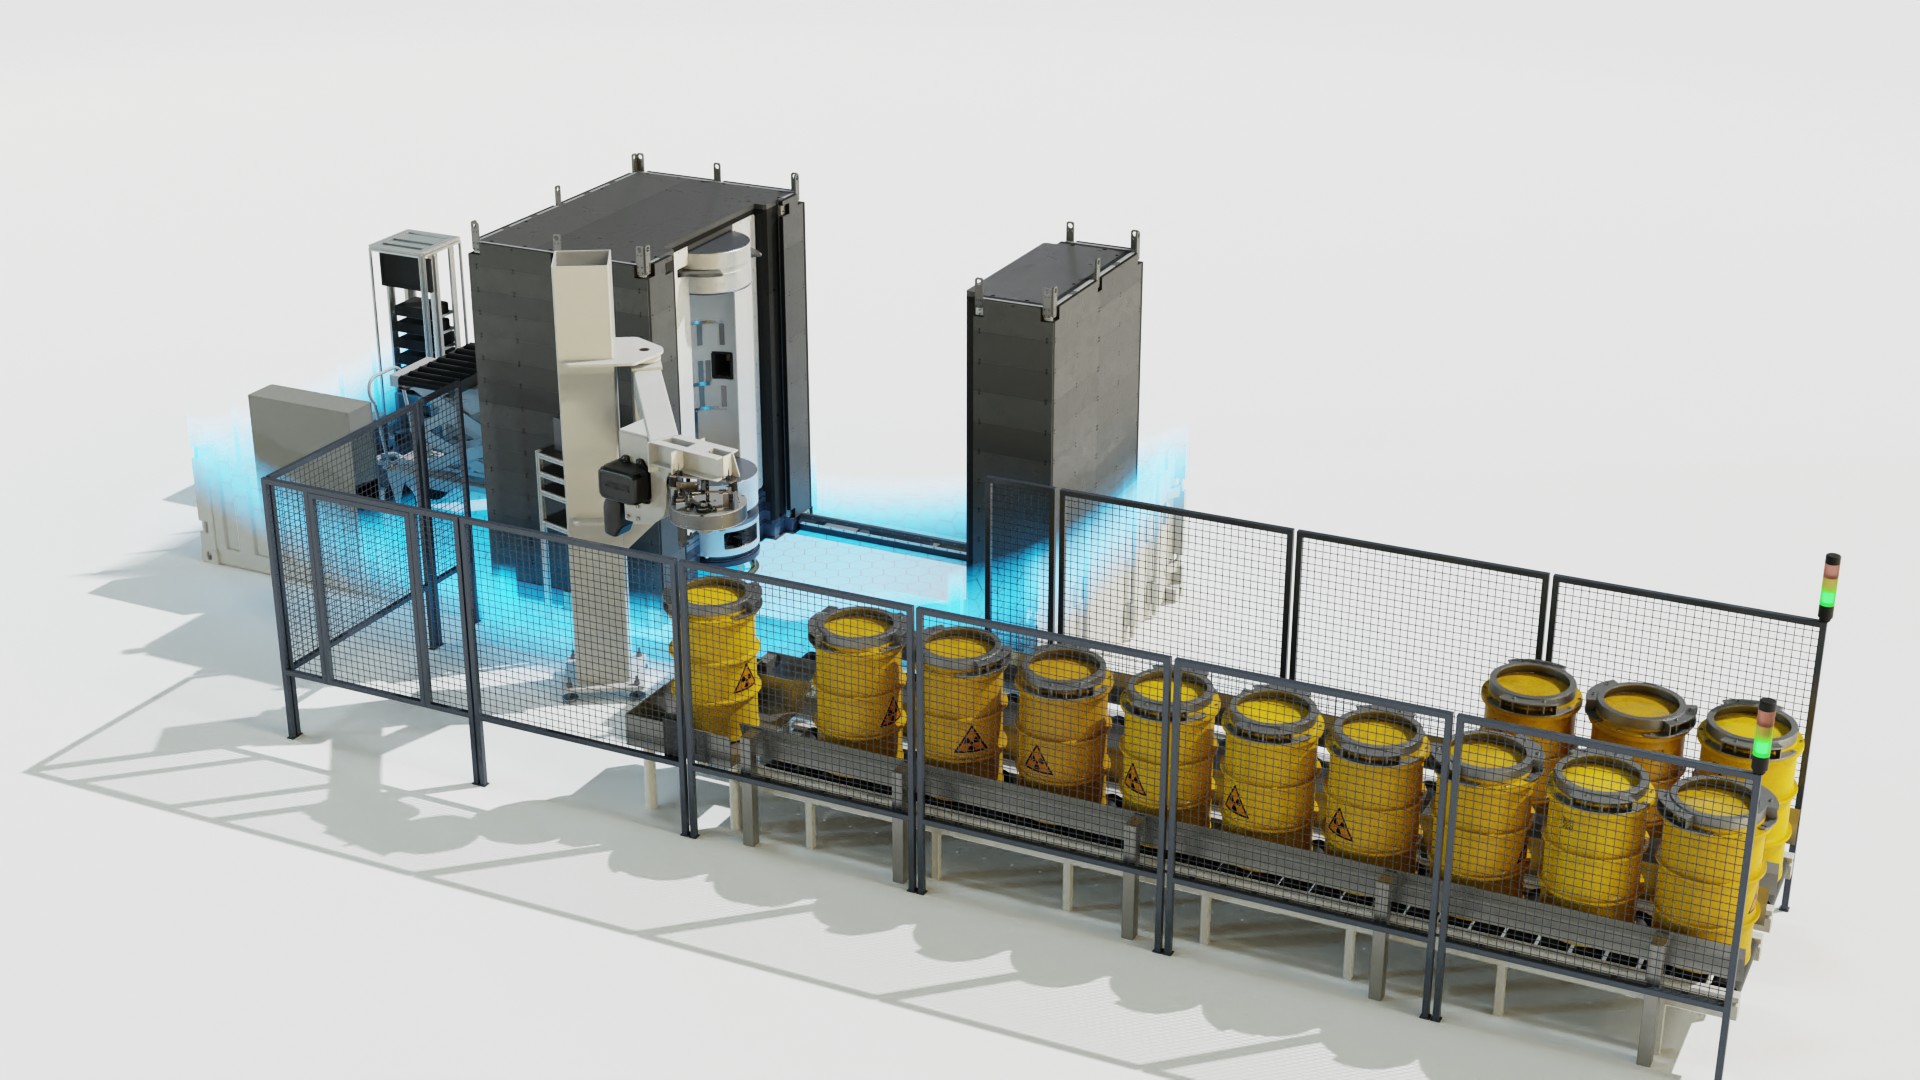 Figure 2: When the Quantom system is in automated operation, the waste drums are guided in and out on a conveyor belt